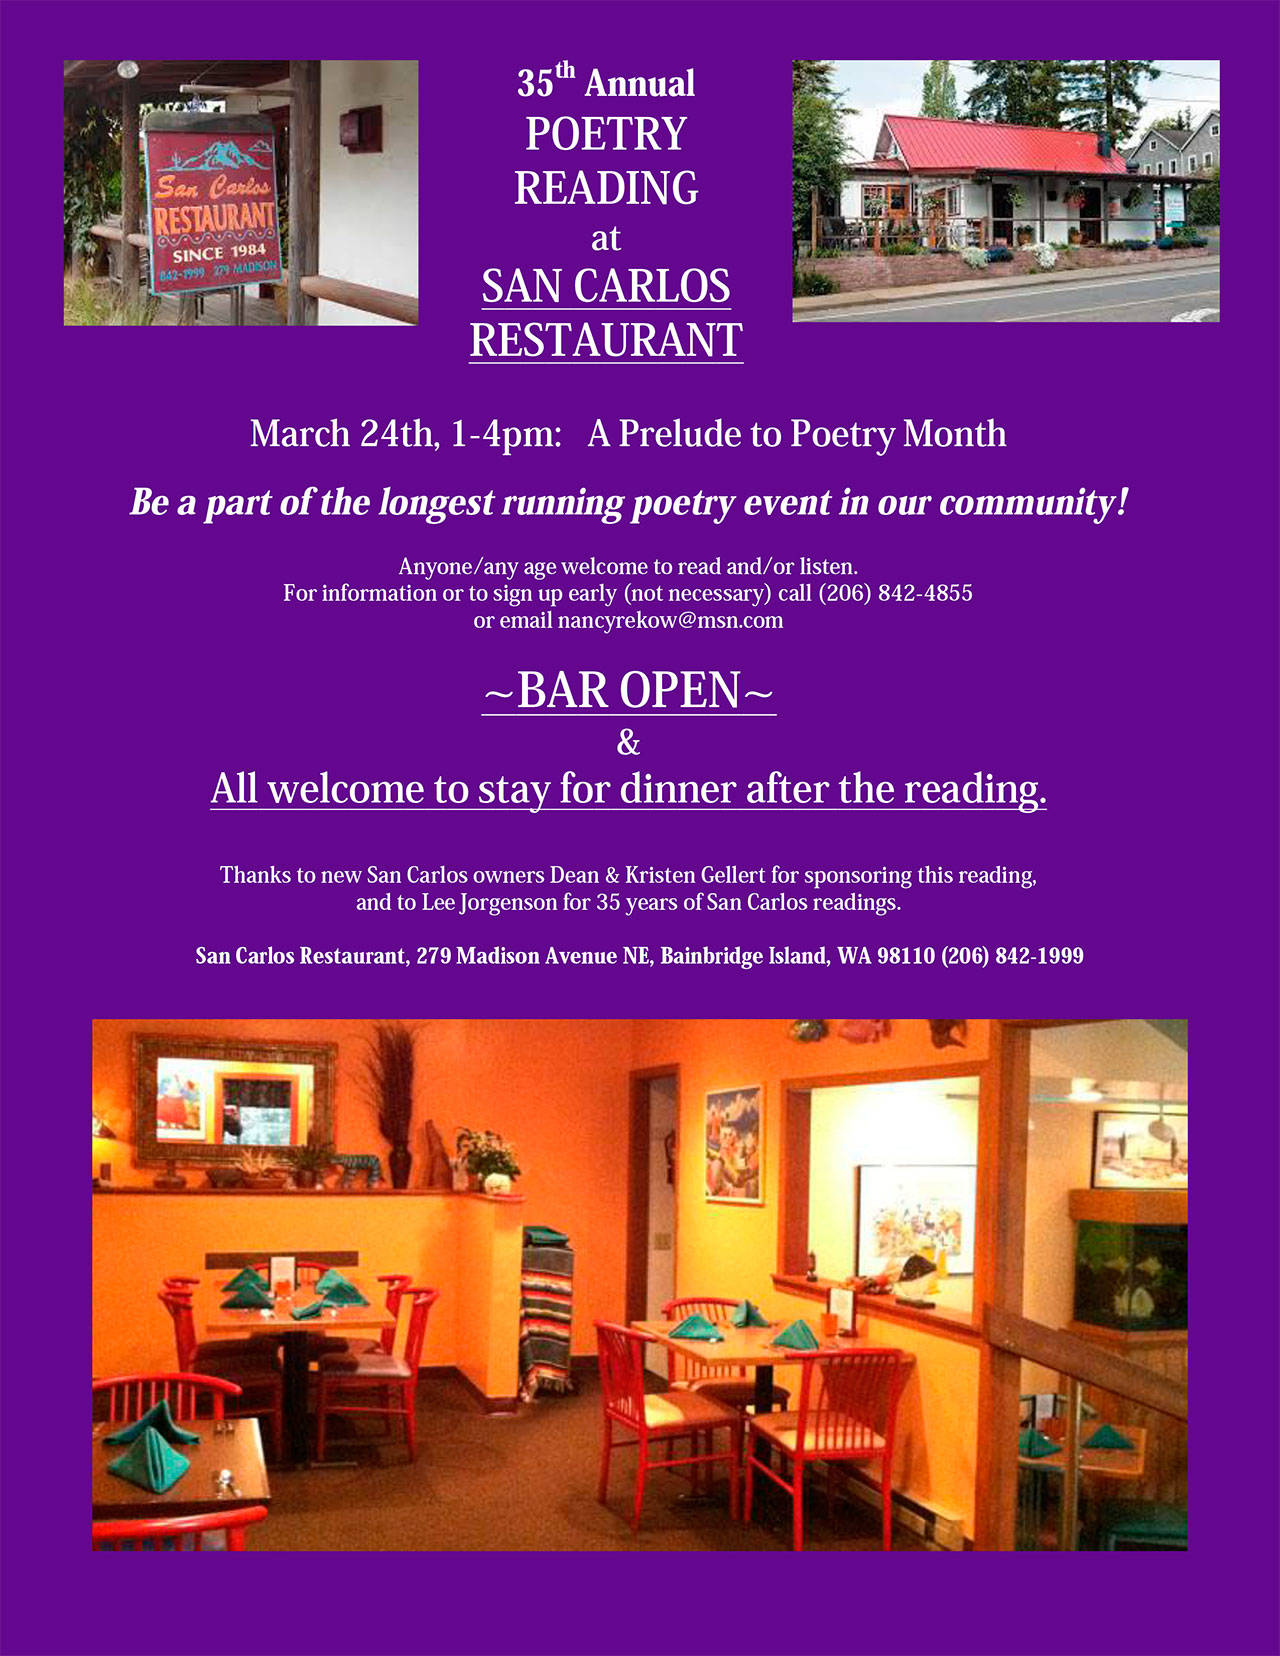 Image courtesy of Nancy Rekow | The annual poetry reading at San Carlos Restaurant will return at 1 p.m. Sunday, March 24.